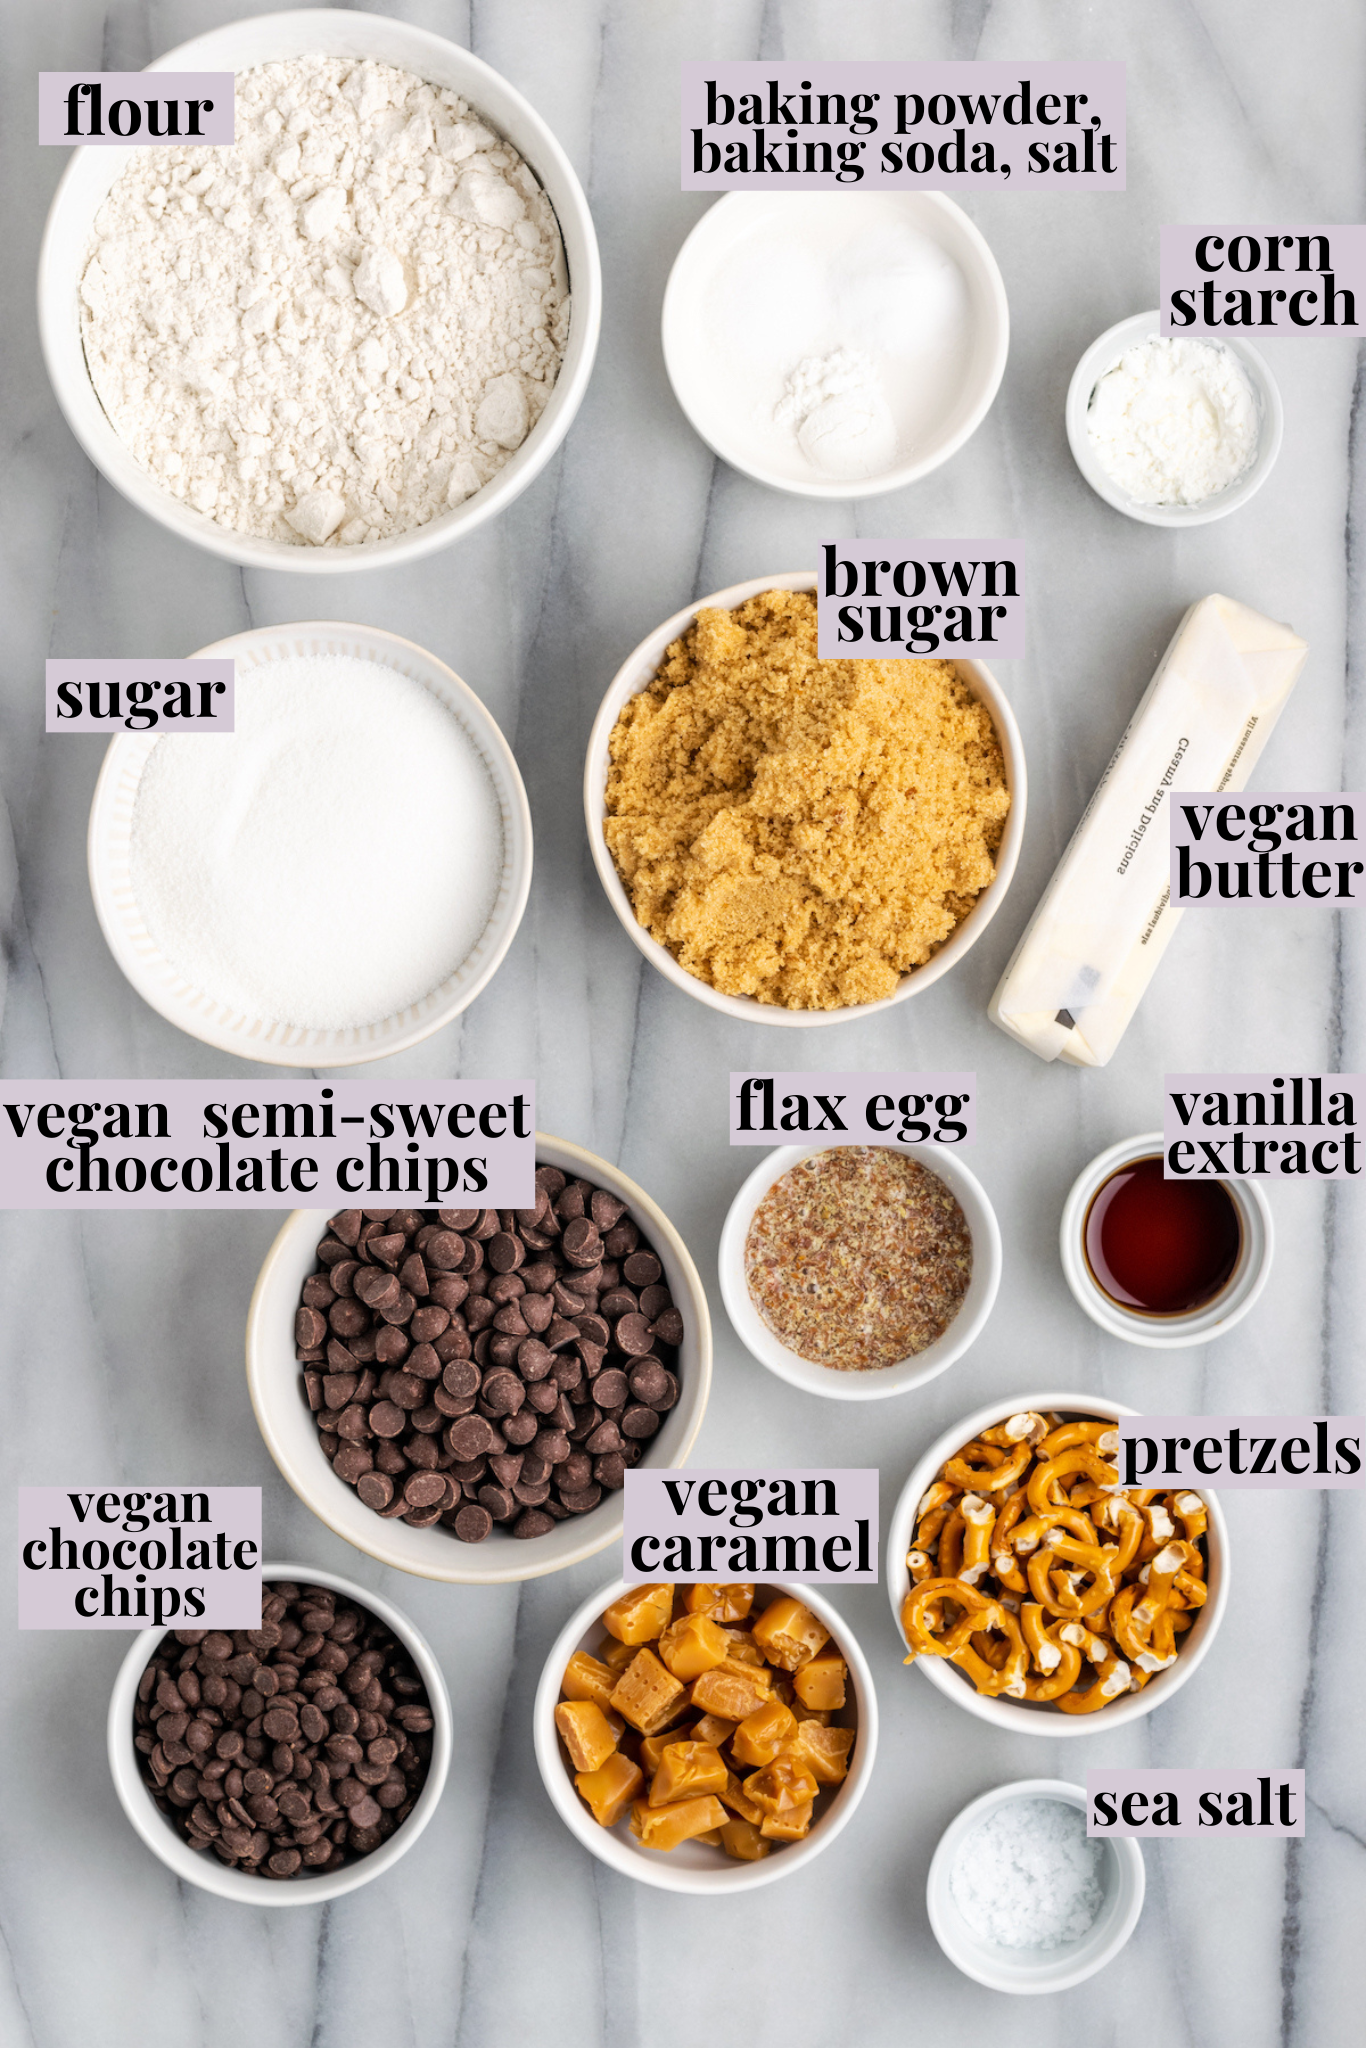 Overhead view of ingredients for kitchen sink cookies with labels